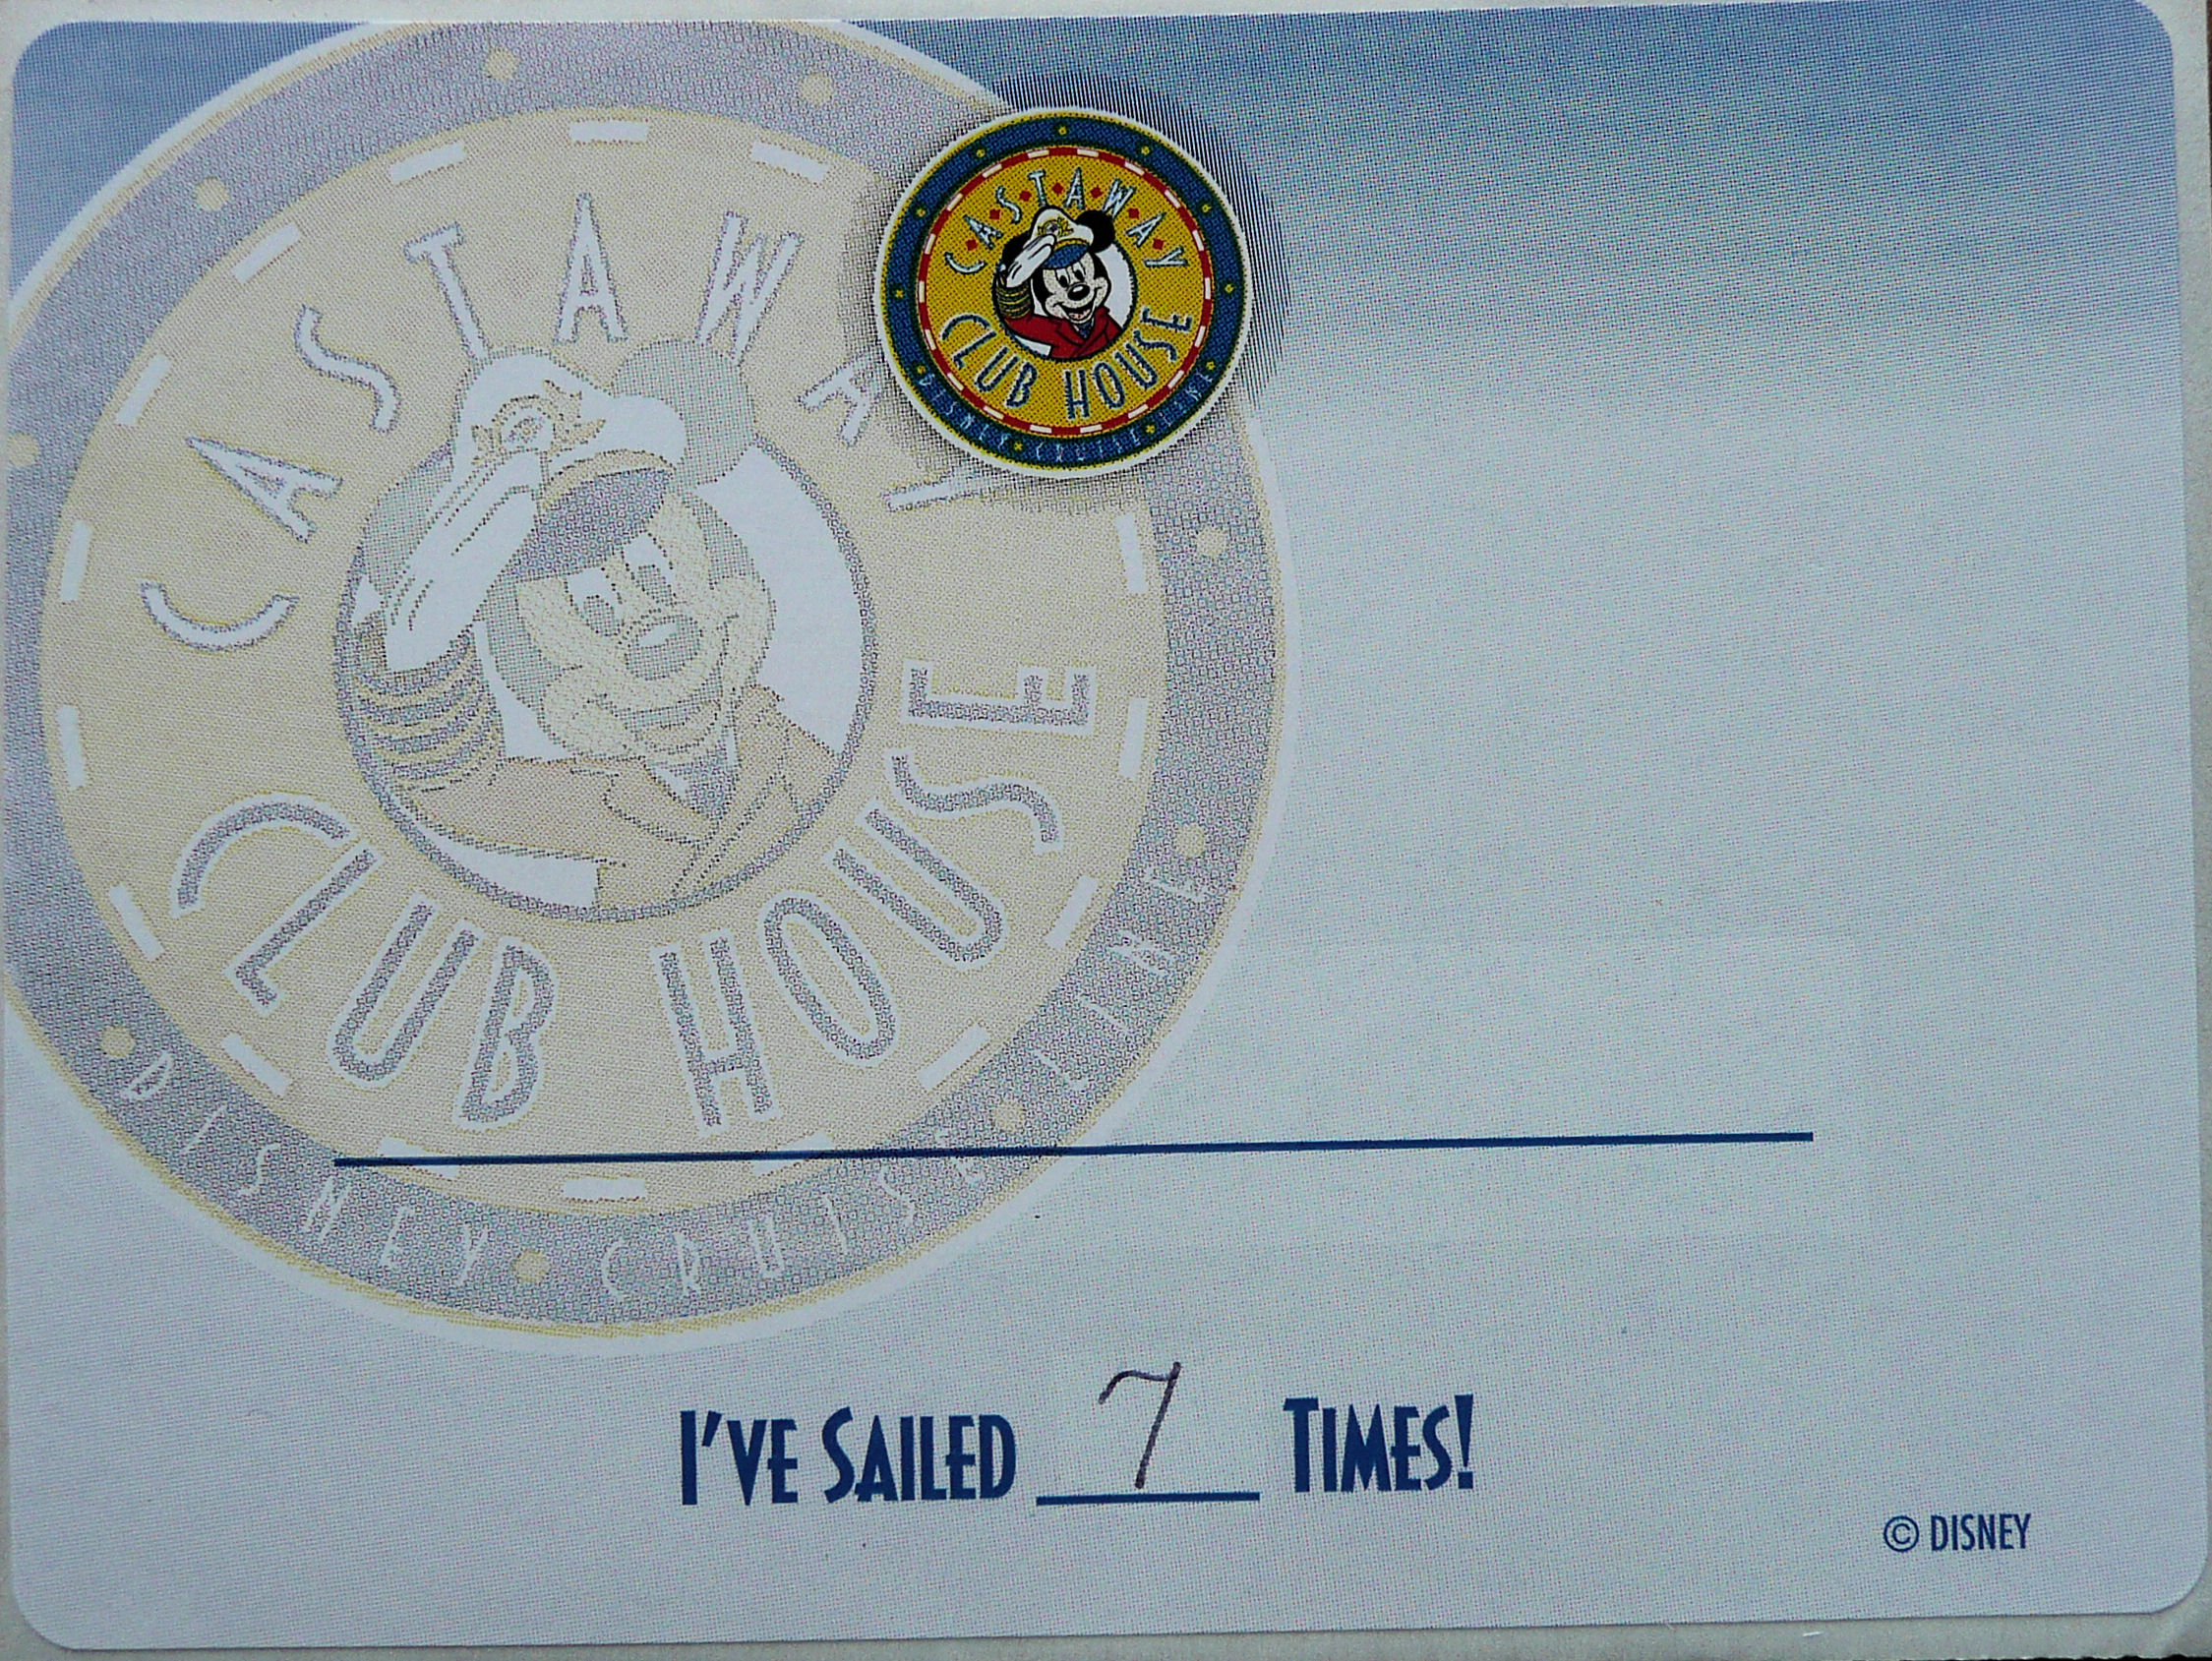 y sailing record on the Disney Cruise Line in 2009.